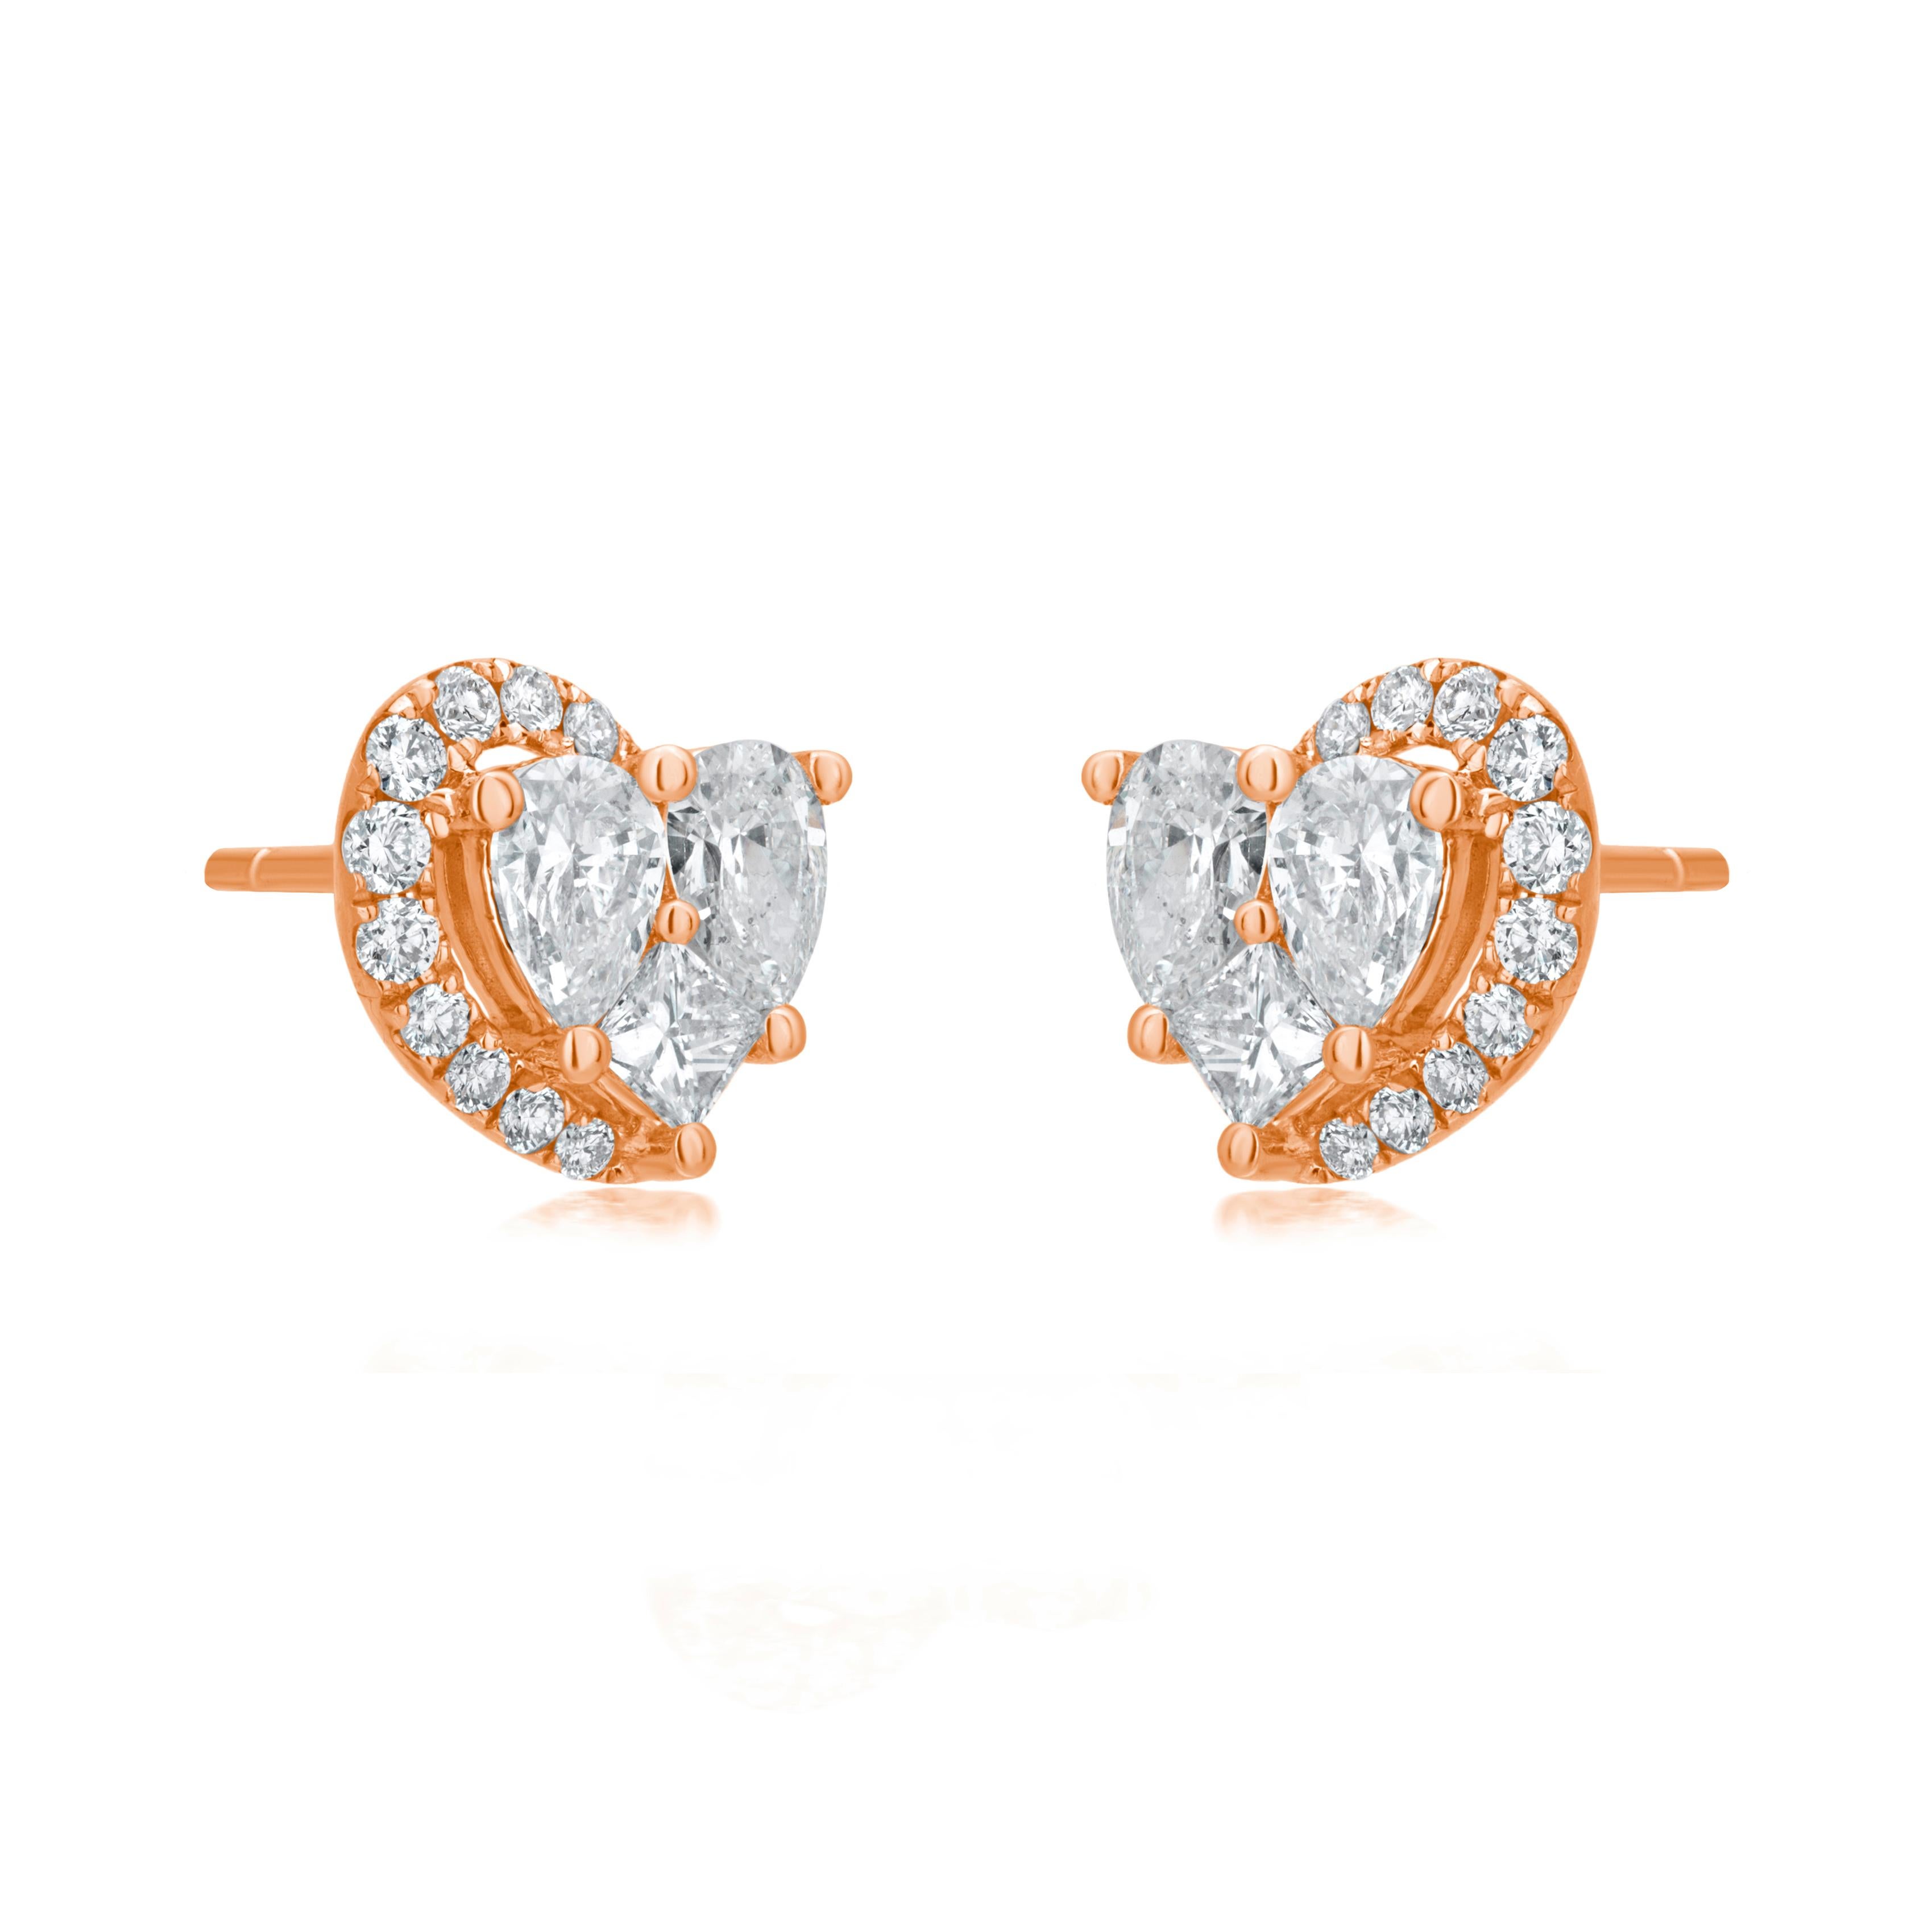 This heart-shaped stud earring pair is adorned with full-cut diamonds, pear-shaped white diamonds, and square full-cut white diamonds. The diamonds are SI, VS, SI3 in clarity and IJ, GH, G in color, weighing 1.4 Cts. Crafted by Luxle on an 18K Rose